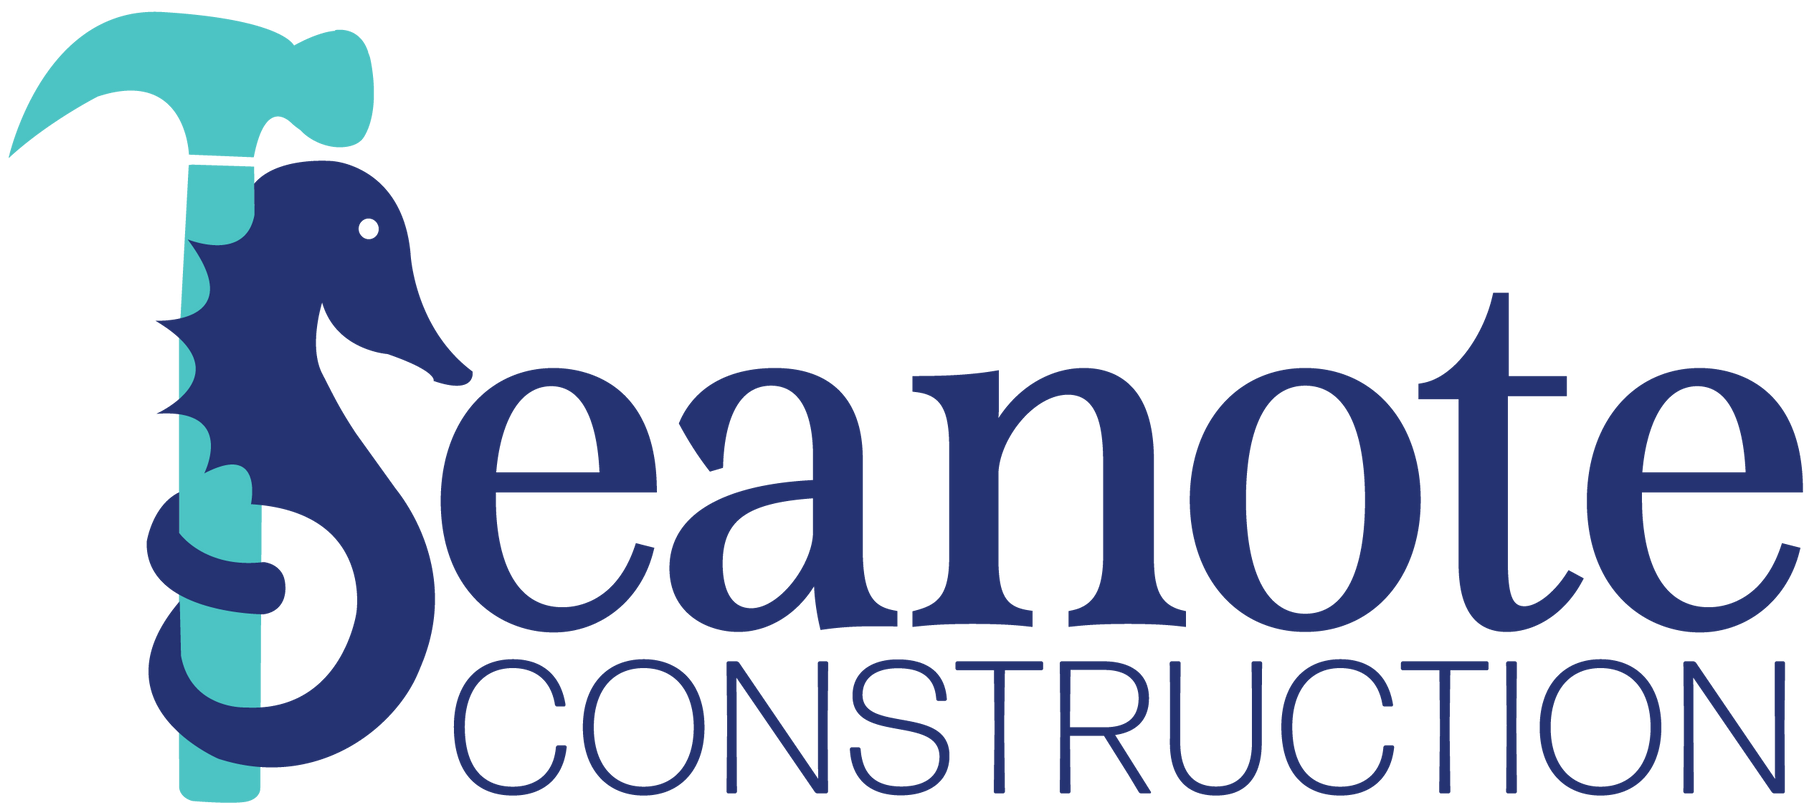 a logo for seanote construction with a seahorse and hammer .